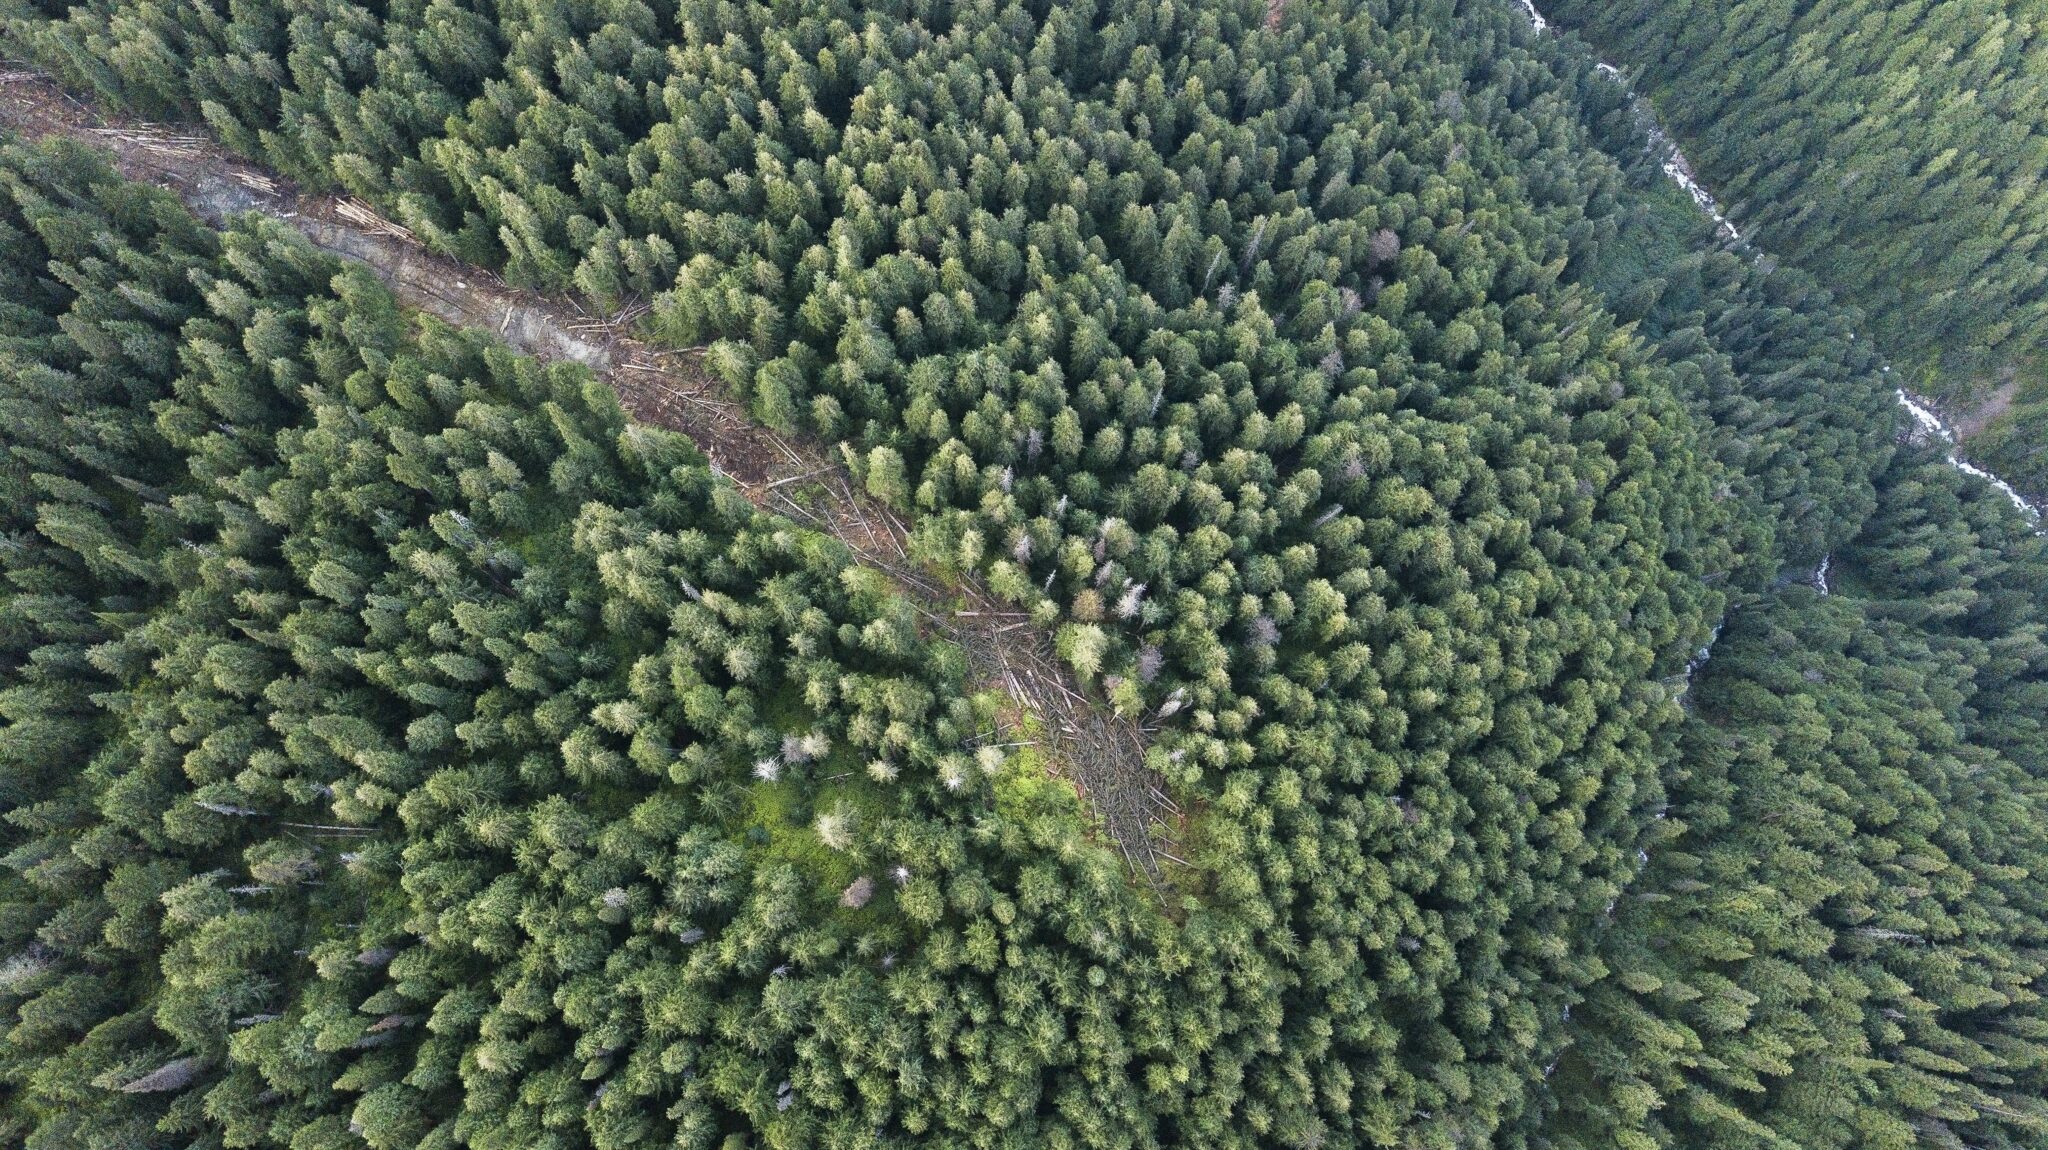 B.C. Timber Sales recently cut a five-kilometre road through old-growth cedar and hemlock to allow for logging in critical habitat for the endangered Columbia North caribou herd. The agency has now suspended plans to auction off 11 cutblocks. Photo: Casey Dubois Media and Echo Conservation Society